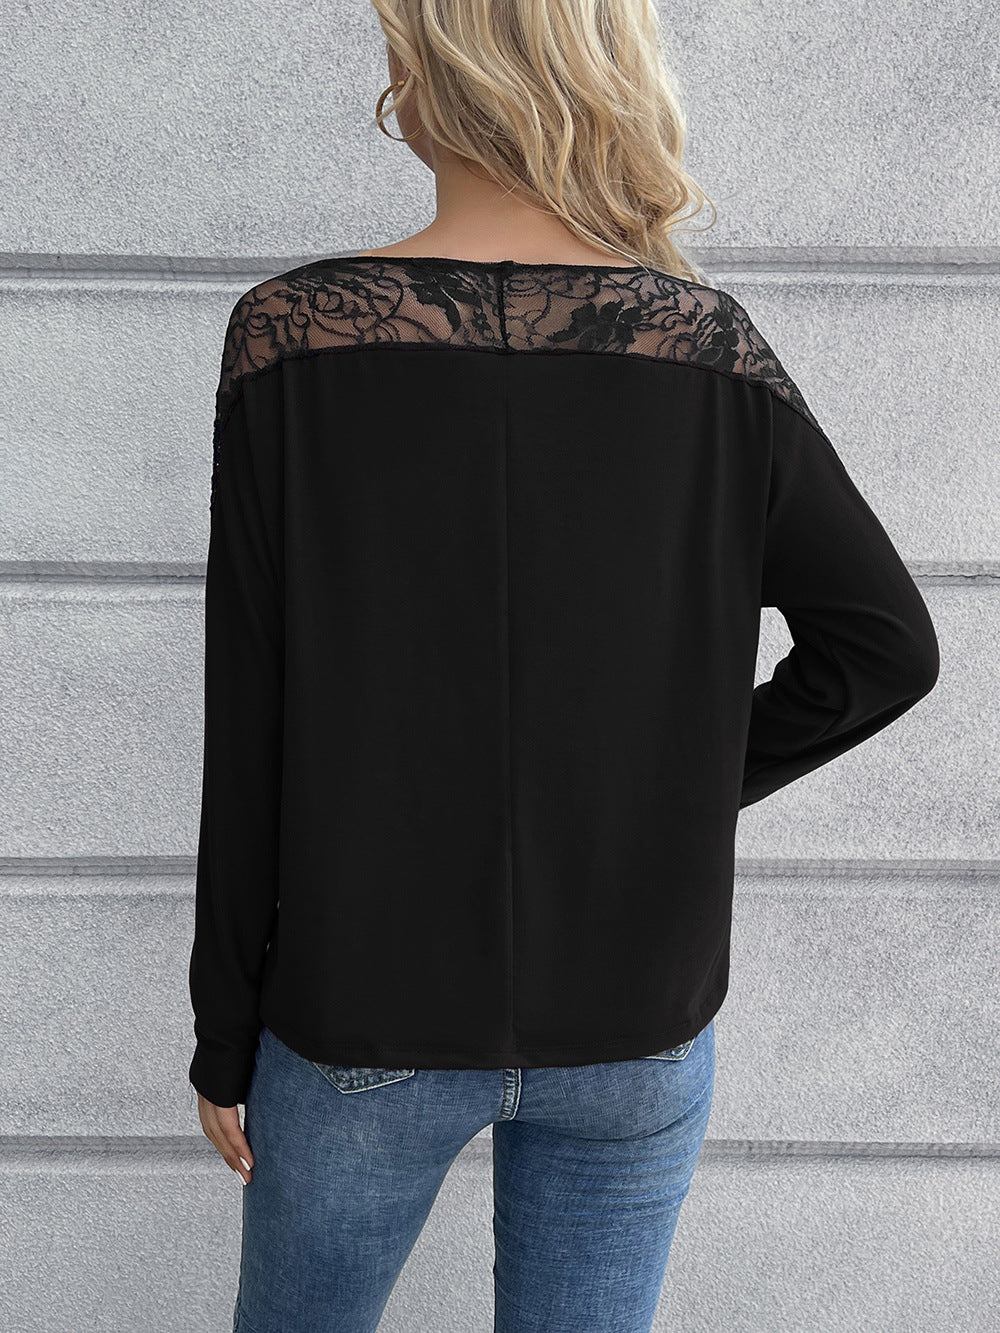 Lace Long Sleeve Round Neck Tee Print on any thing USA/STOD clothes